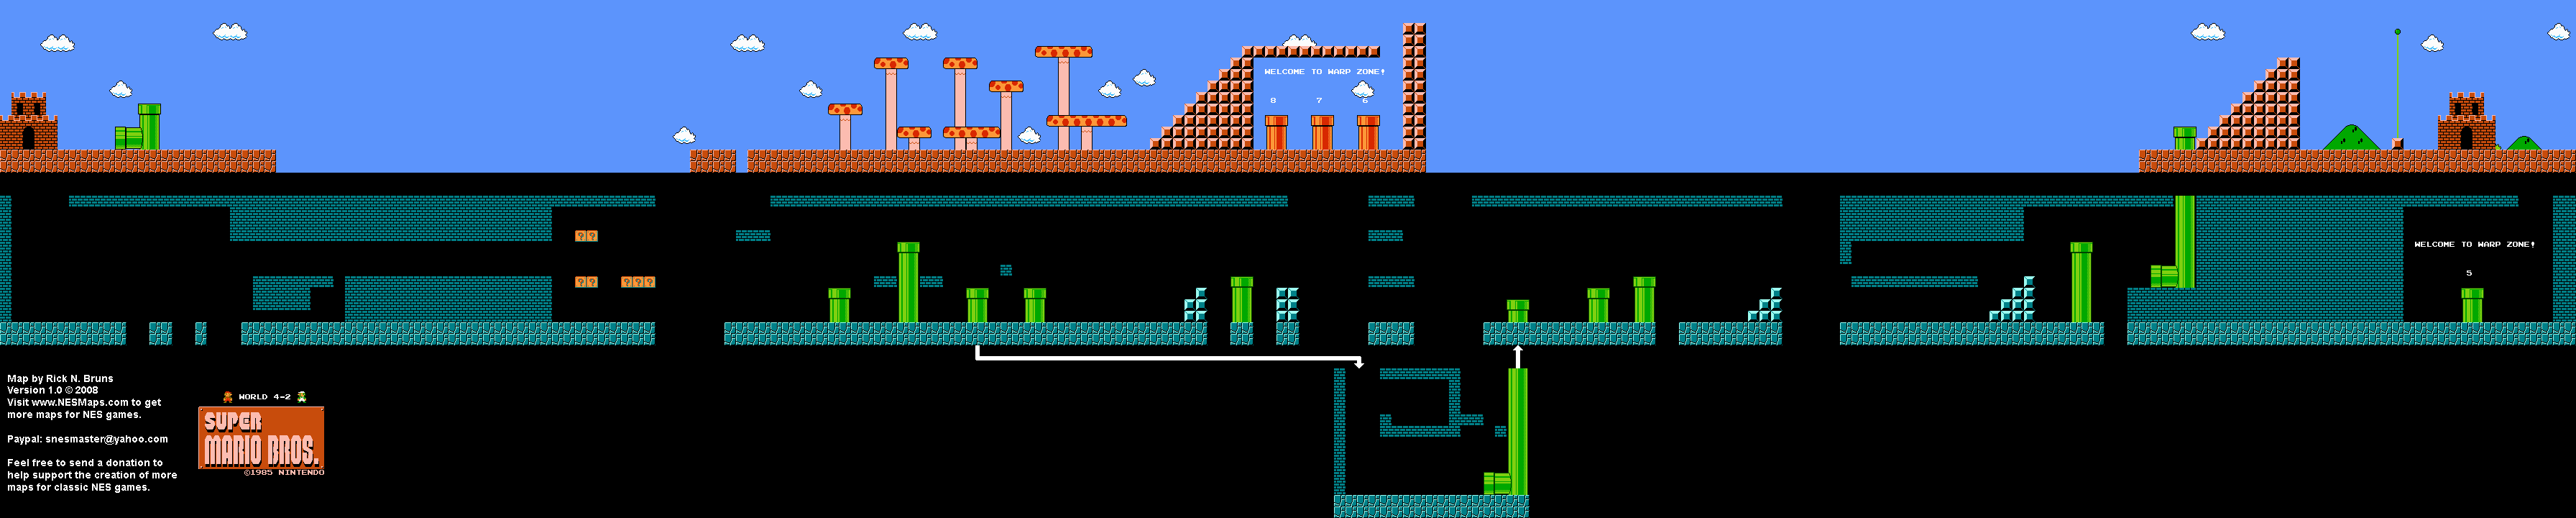 Super Mario Brothers - World 4-2 Nintendo NES Background Only Map